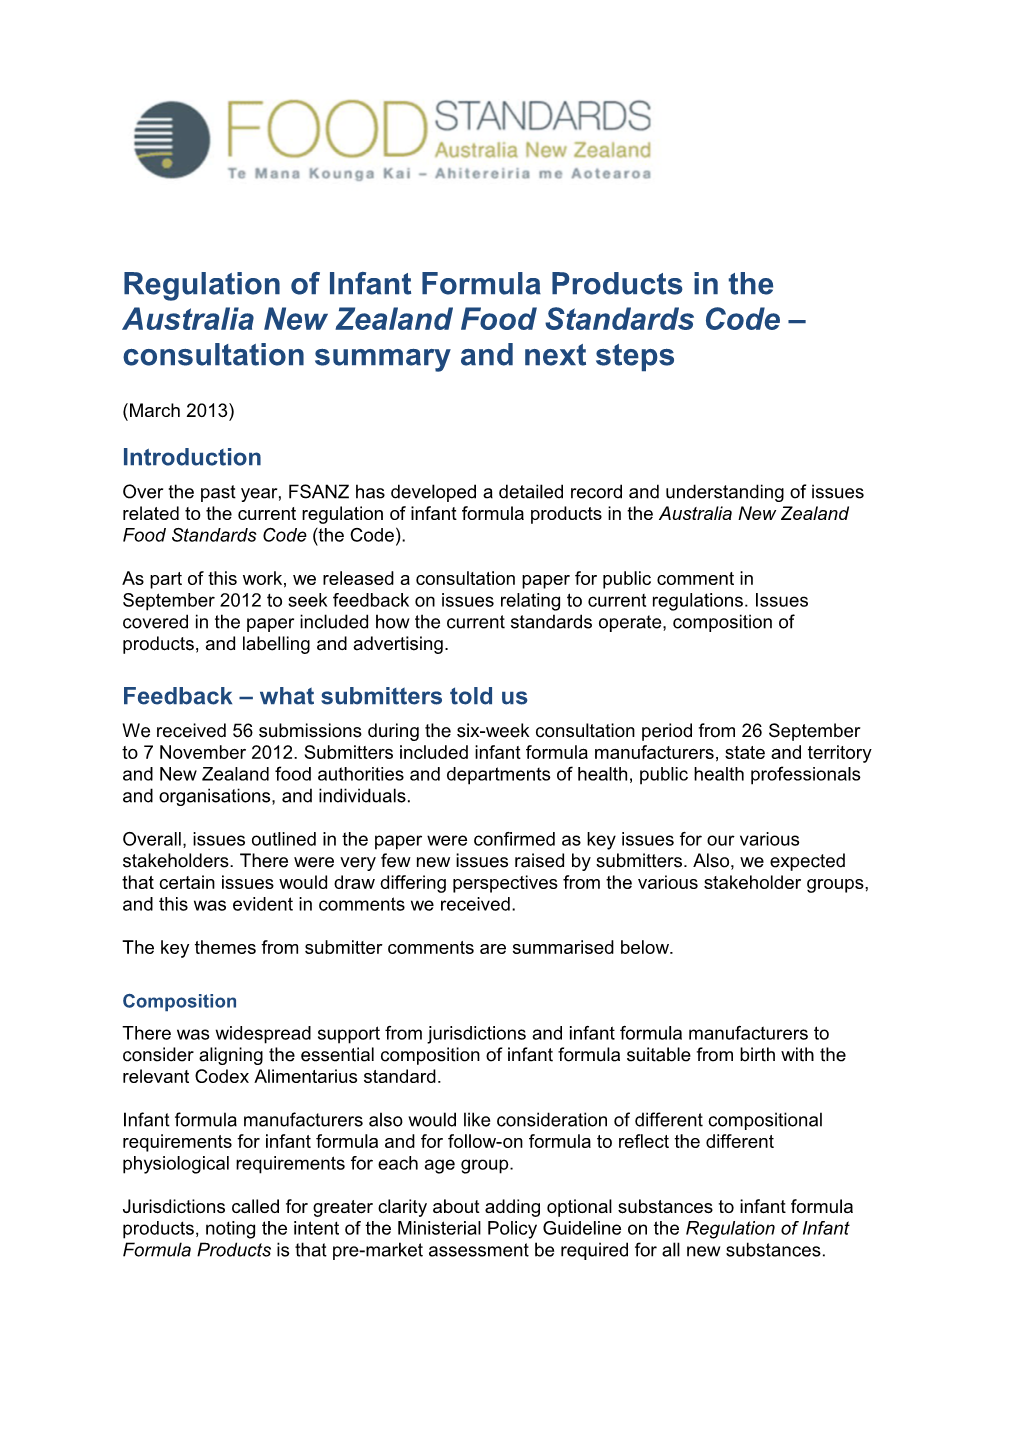 Regulation of Infant Formula Products in the Australia New Zealand Food Standards Code